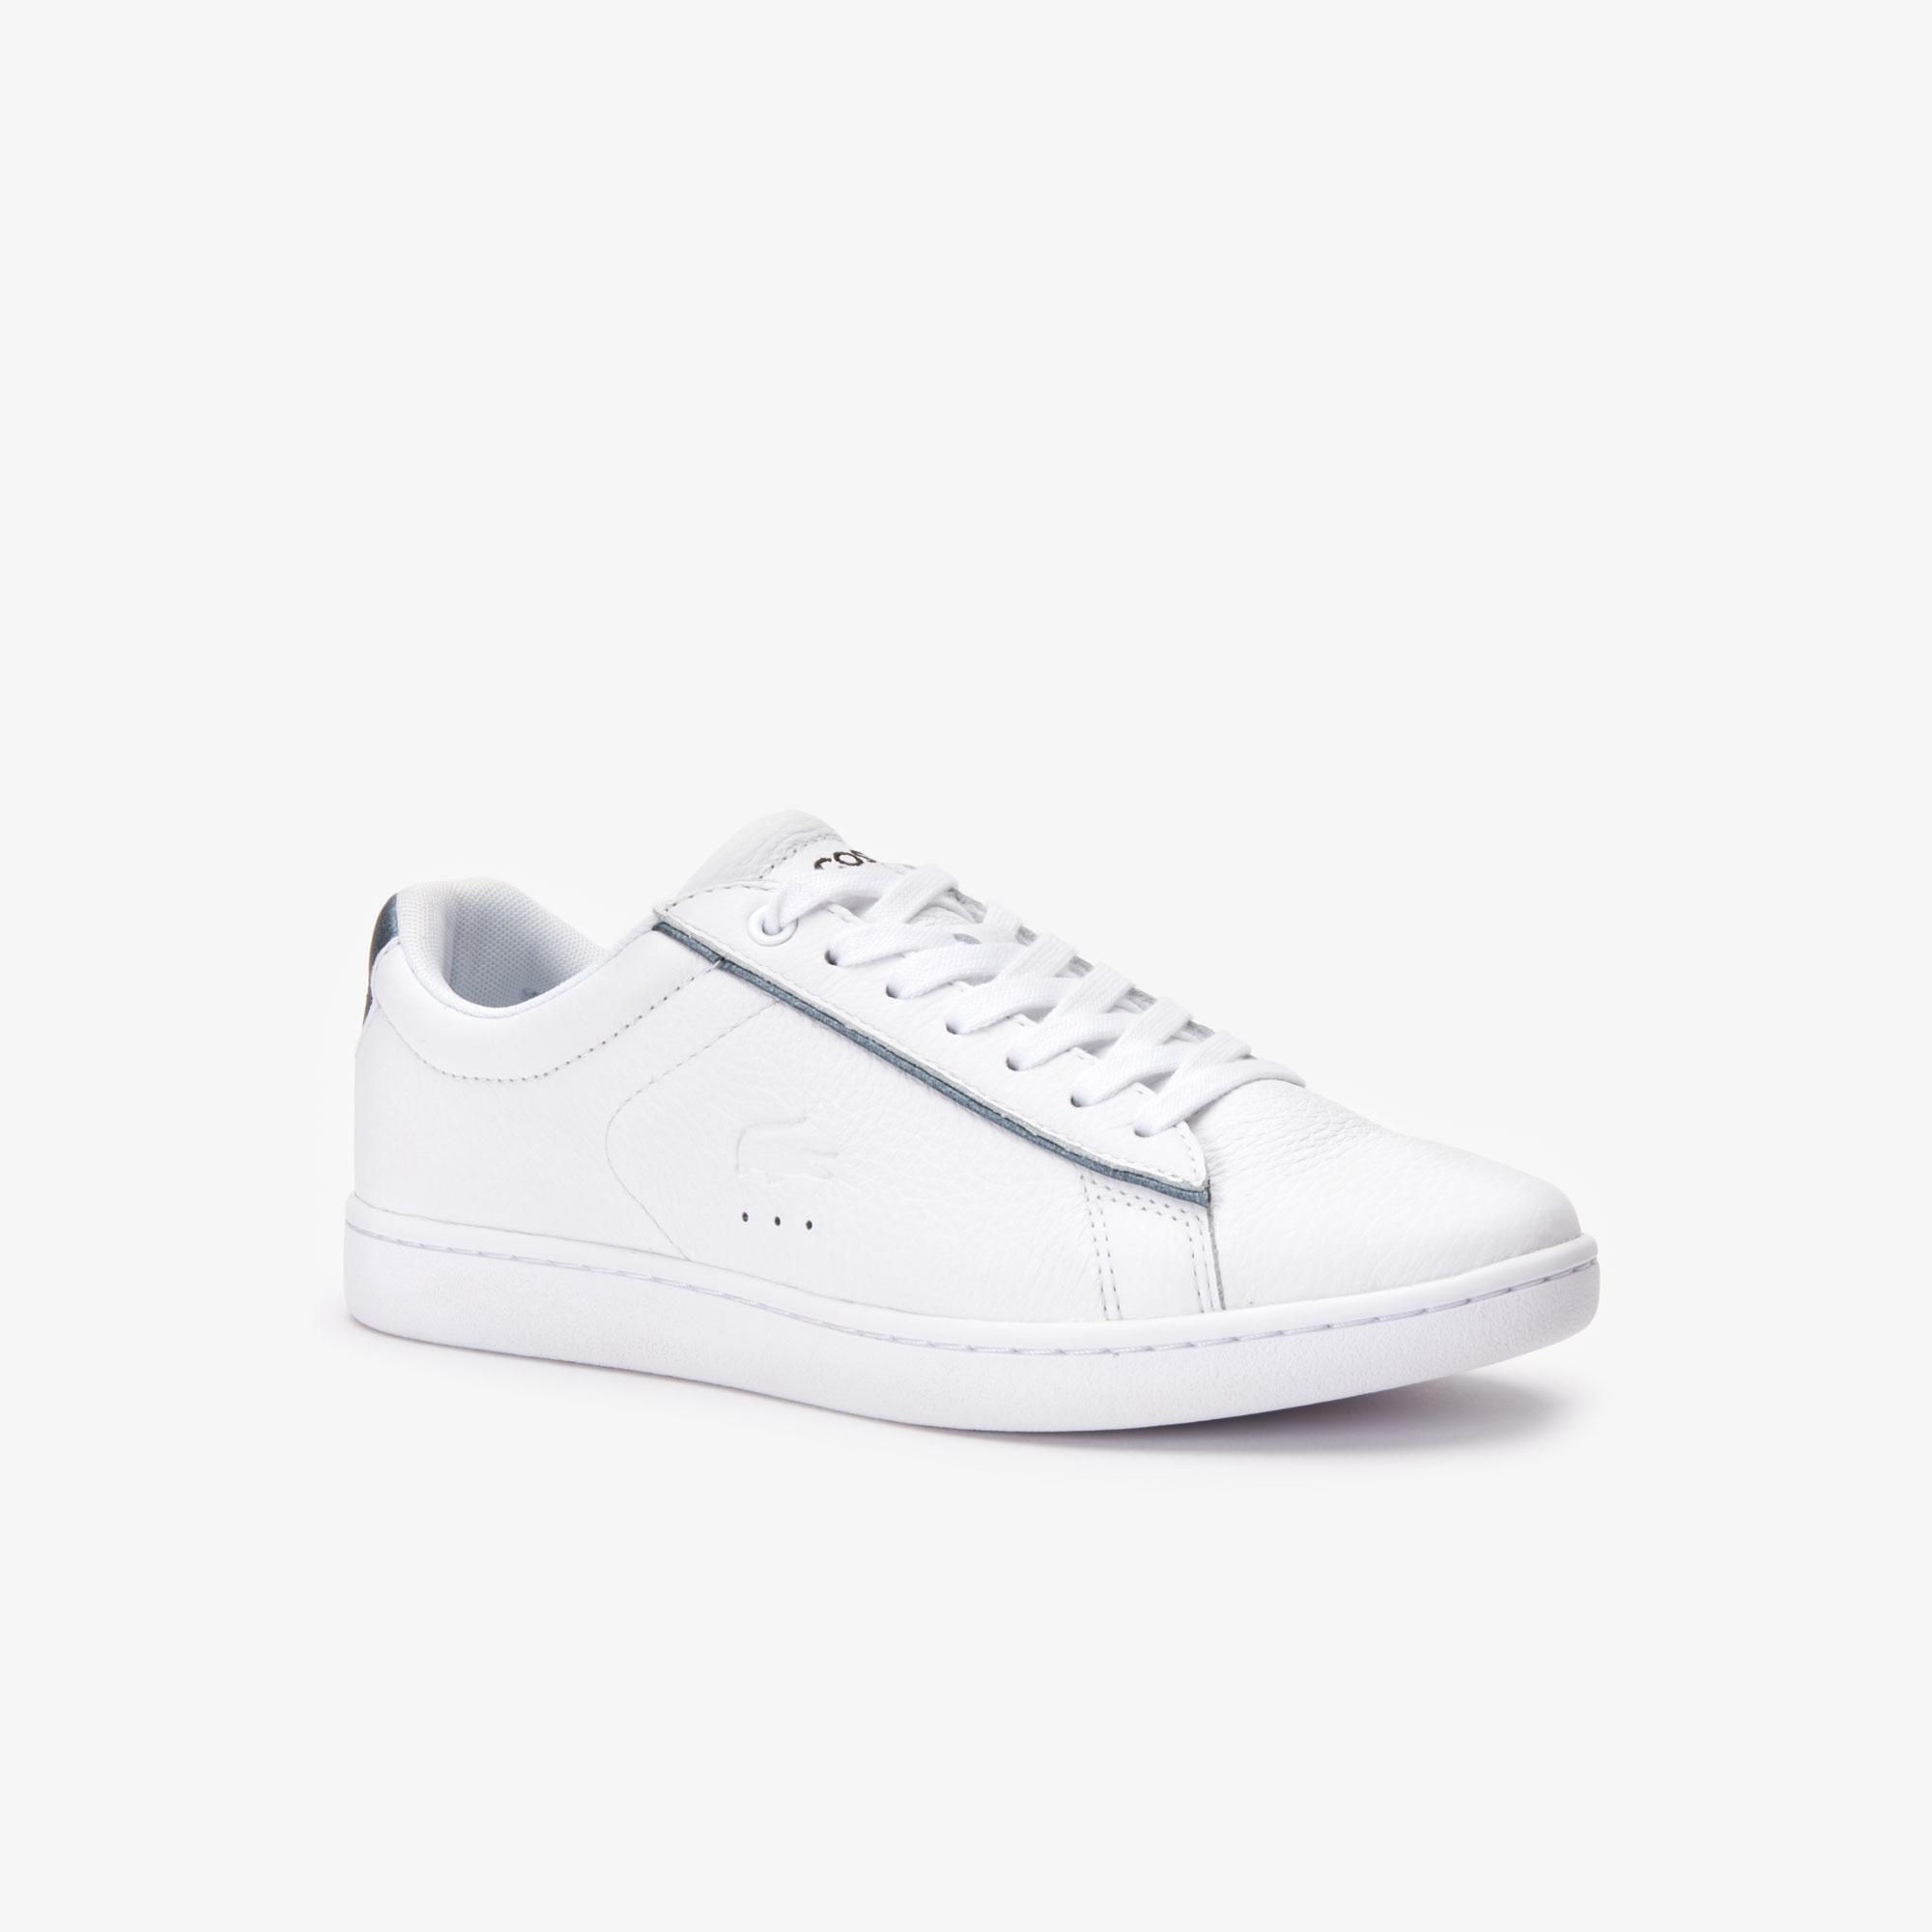 Lacoste Carnaby Evo 319 9 Women's Shoes 